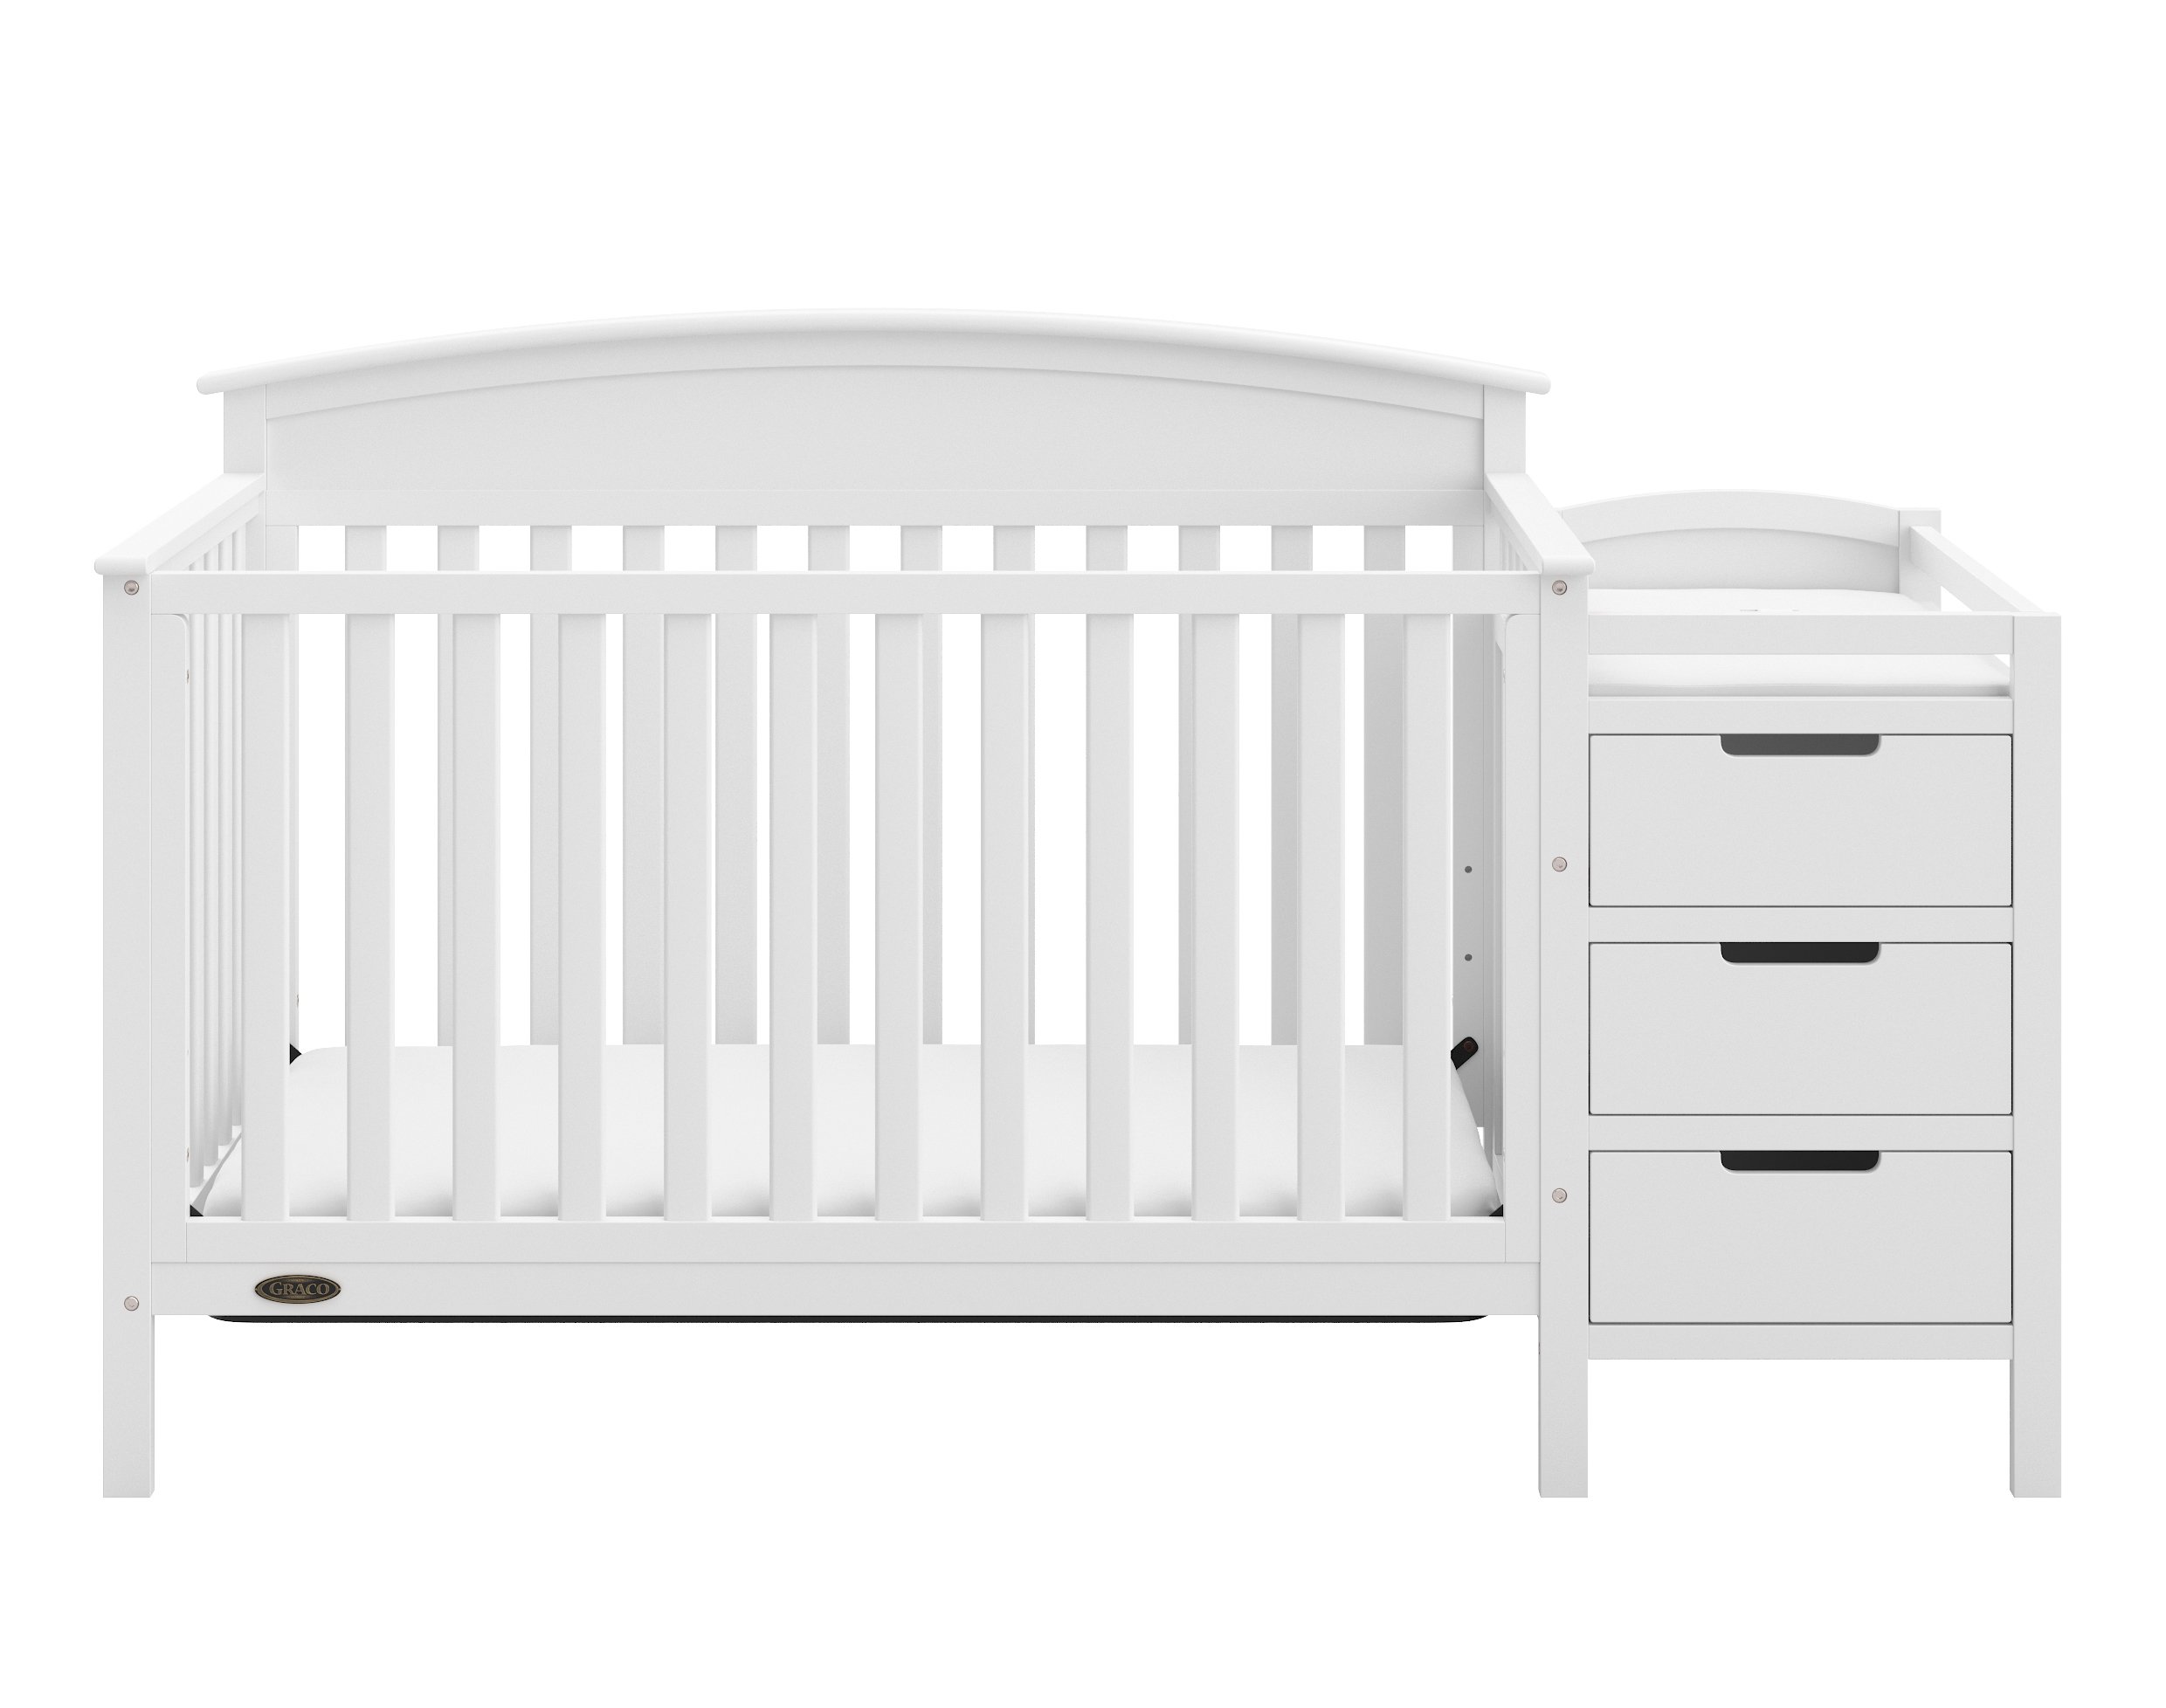 Graco Benton 4-in-1 Convertible Crib and Changer (White) – Crib and Changing Table Combo, Includes Water-Resistant Changing Pad, 3 Drawers, Converts to Toddler Bed, Daybed and Full-Size Bed